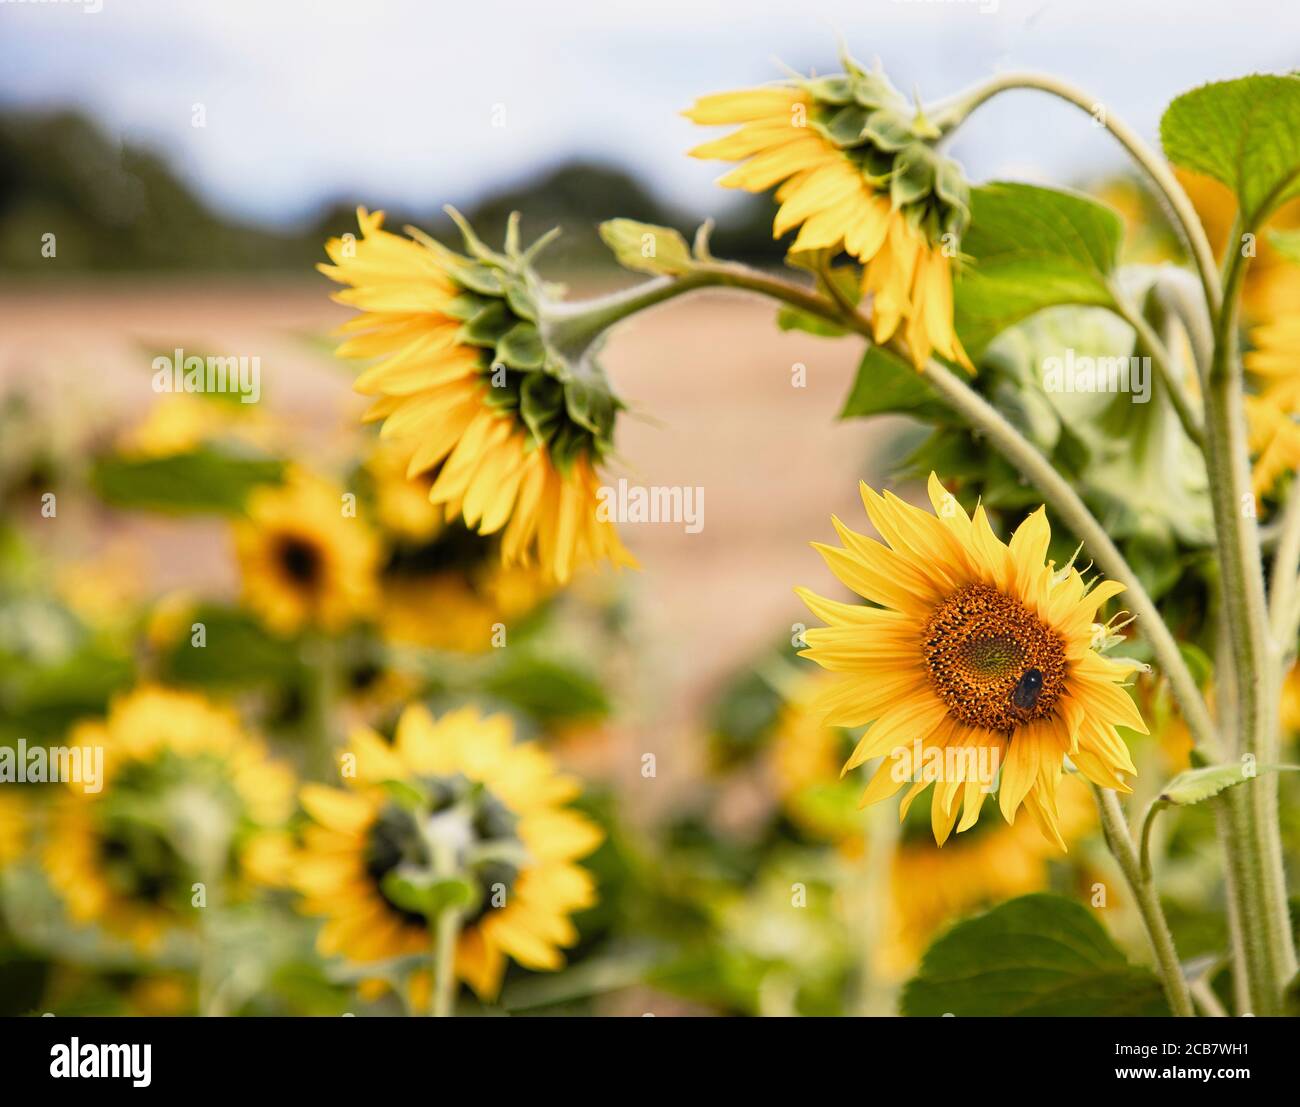 Sunflower, Helianthus, Yellow coloured flowers growing outdoor. Stock Photo